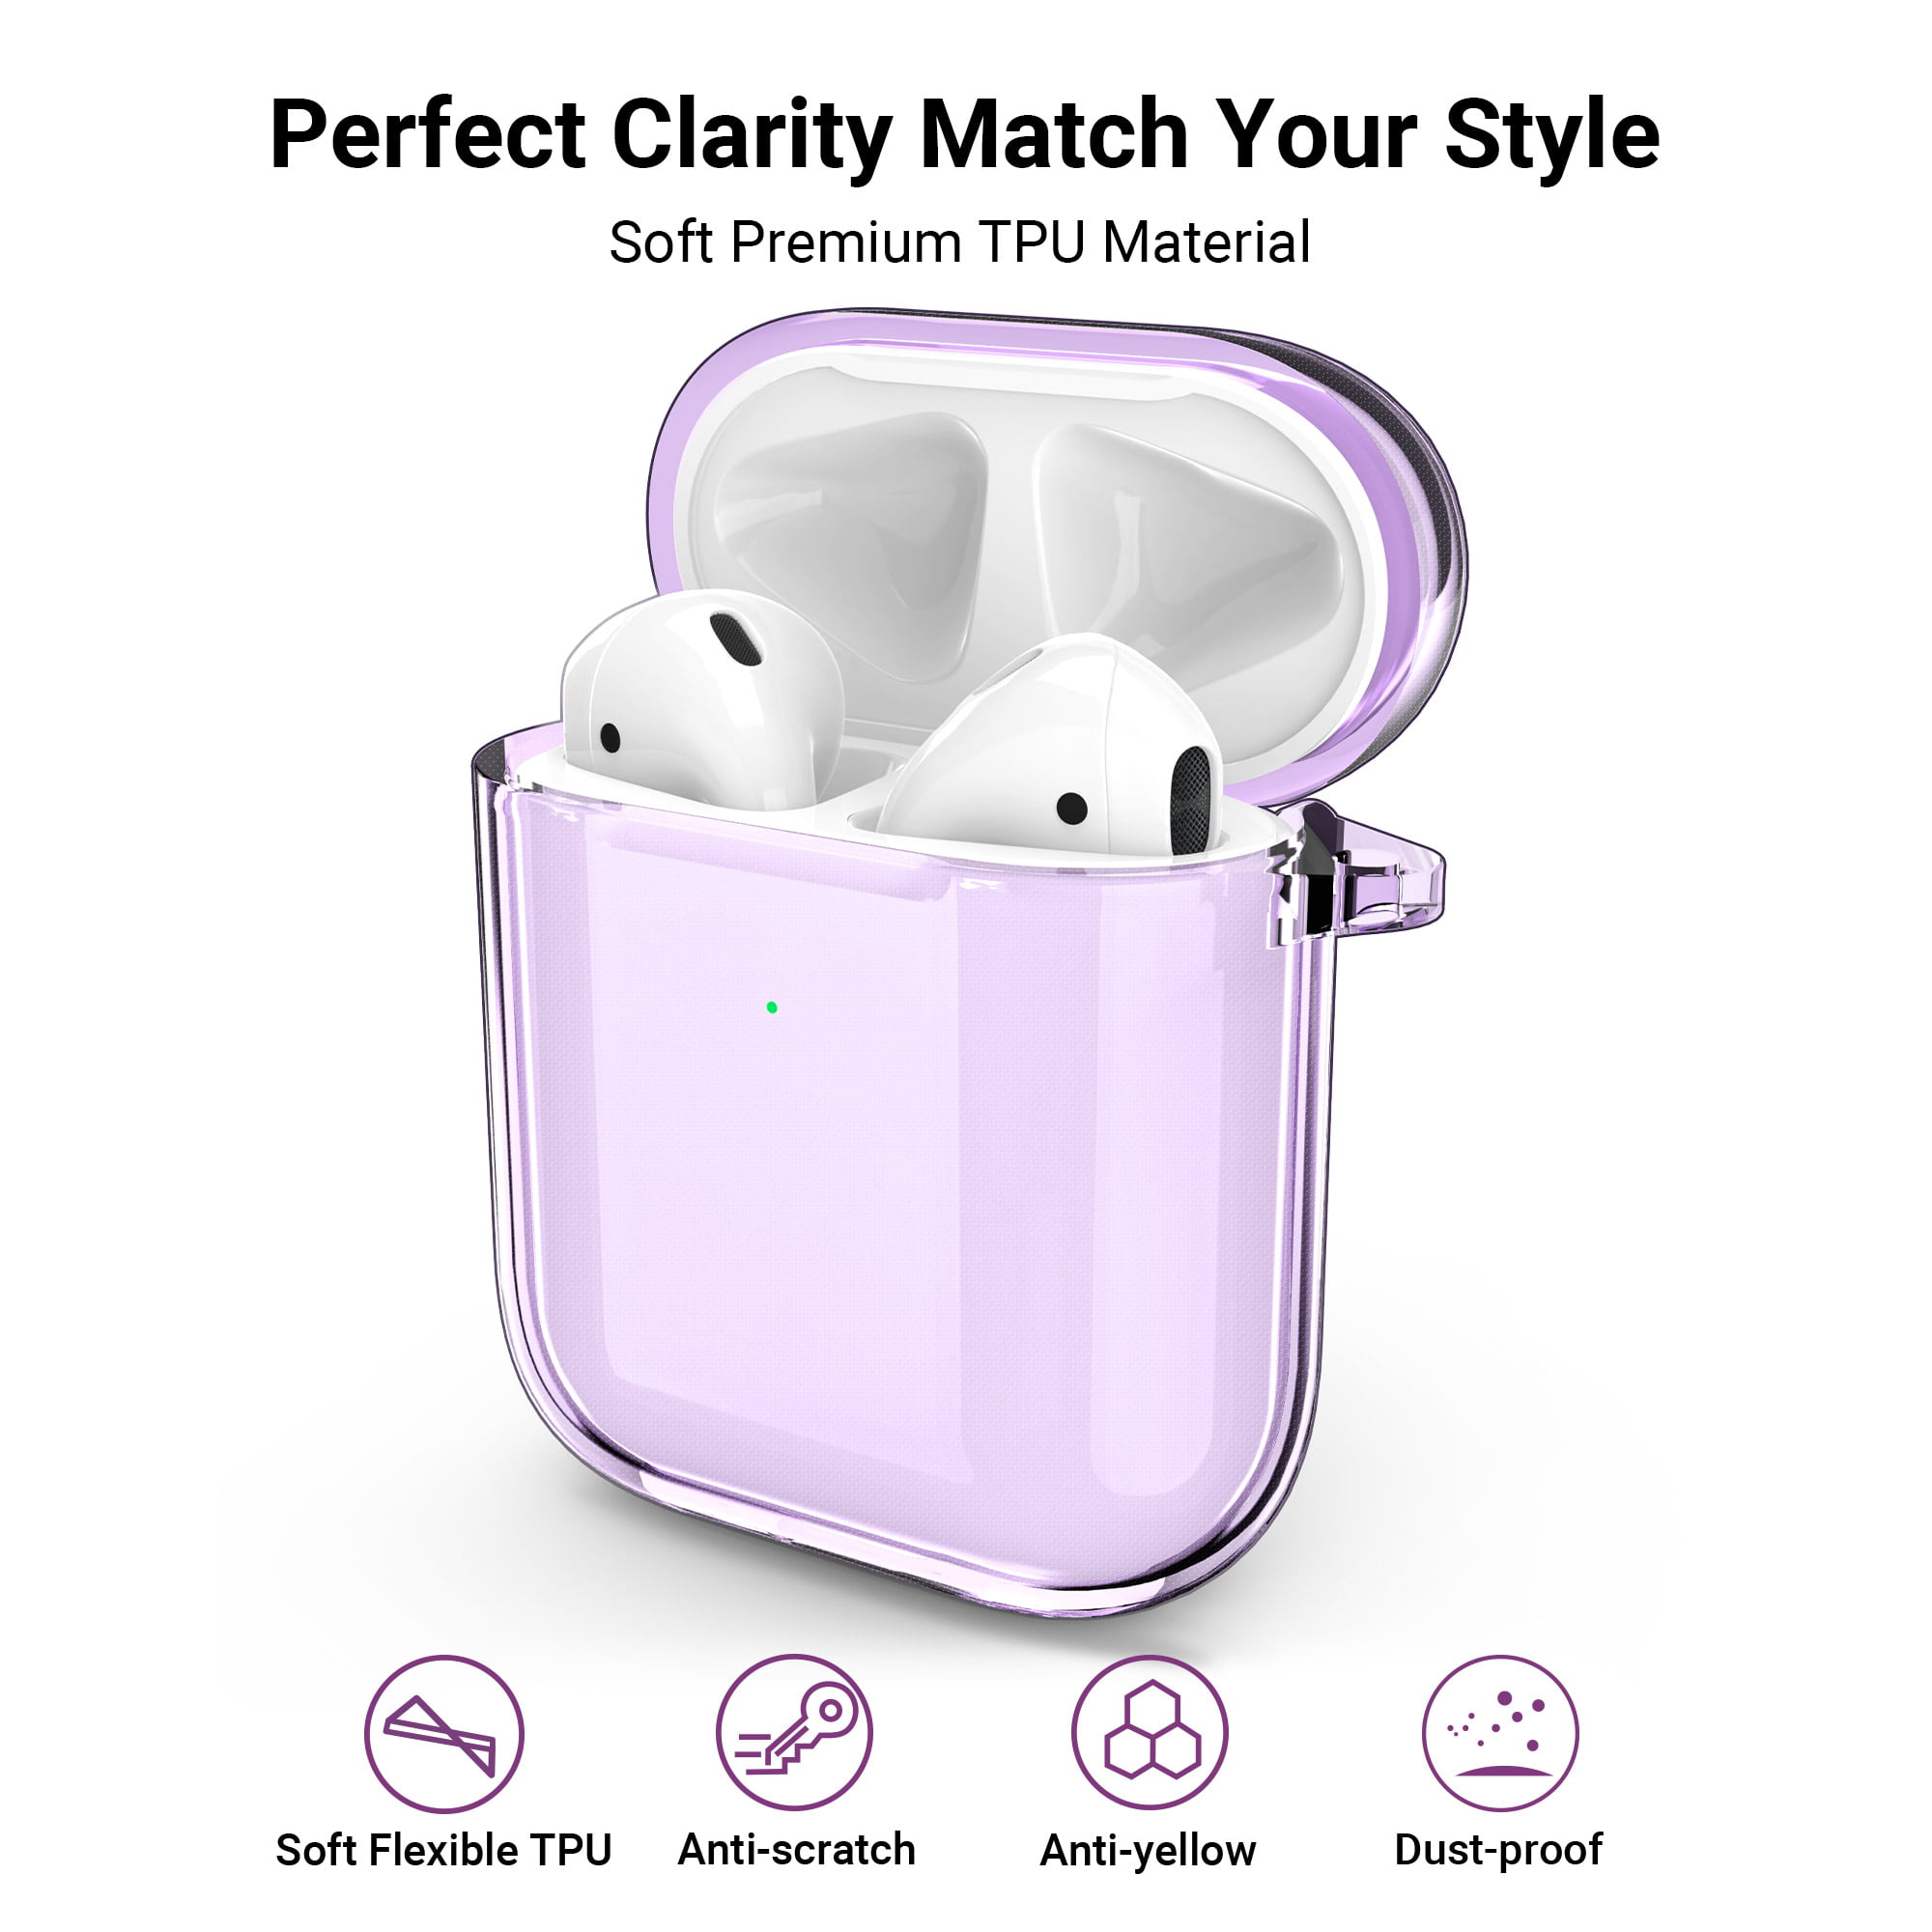  Bling AirPods 2nd Generation Case, VISOOM Cute Airpod Case 1st  Generation with Keychain for Apple Airpod Case Cute Glitter Air Pod Case  iPod Case Cover Women/Girls Silicone AirPods 2 Case(Burgundy) 